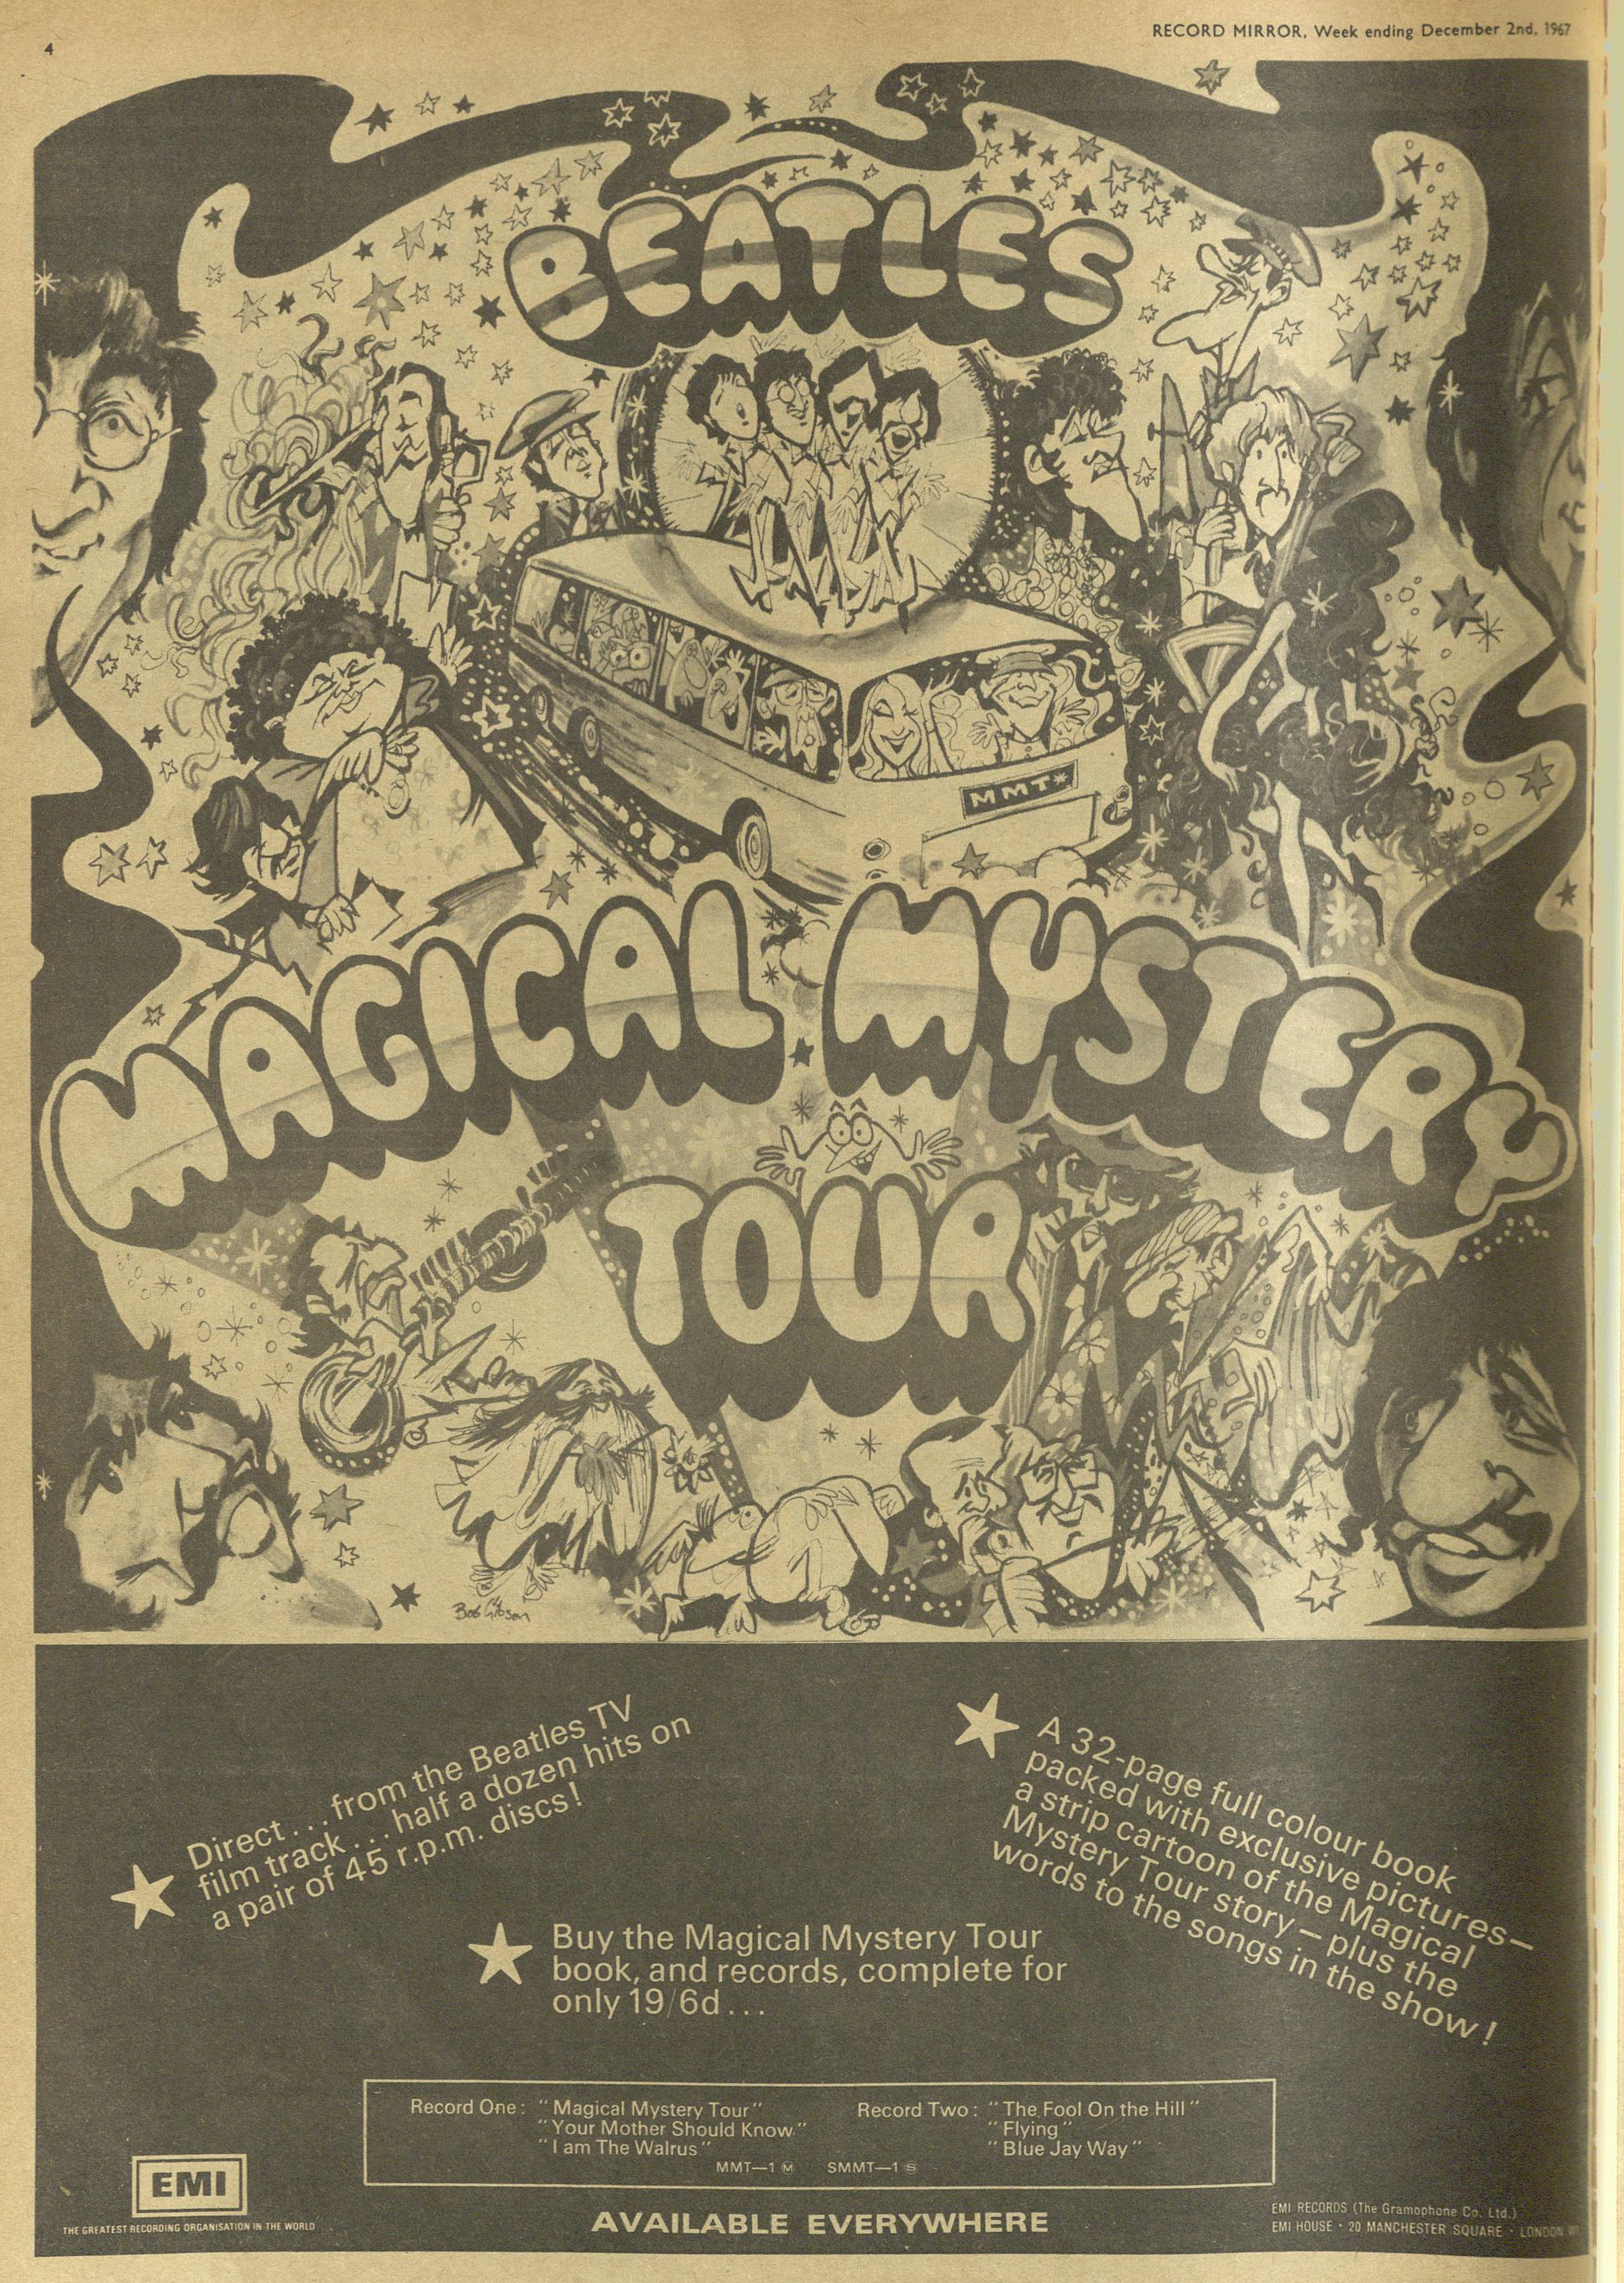 Magical Mystery Tour: Remastered - The Beatles